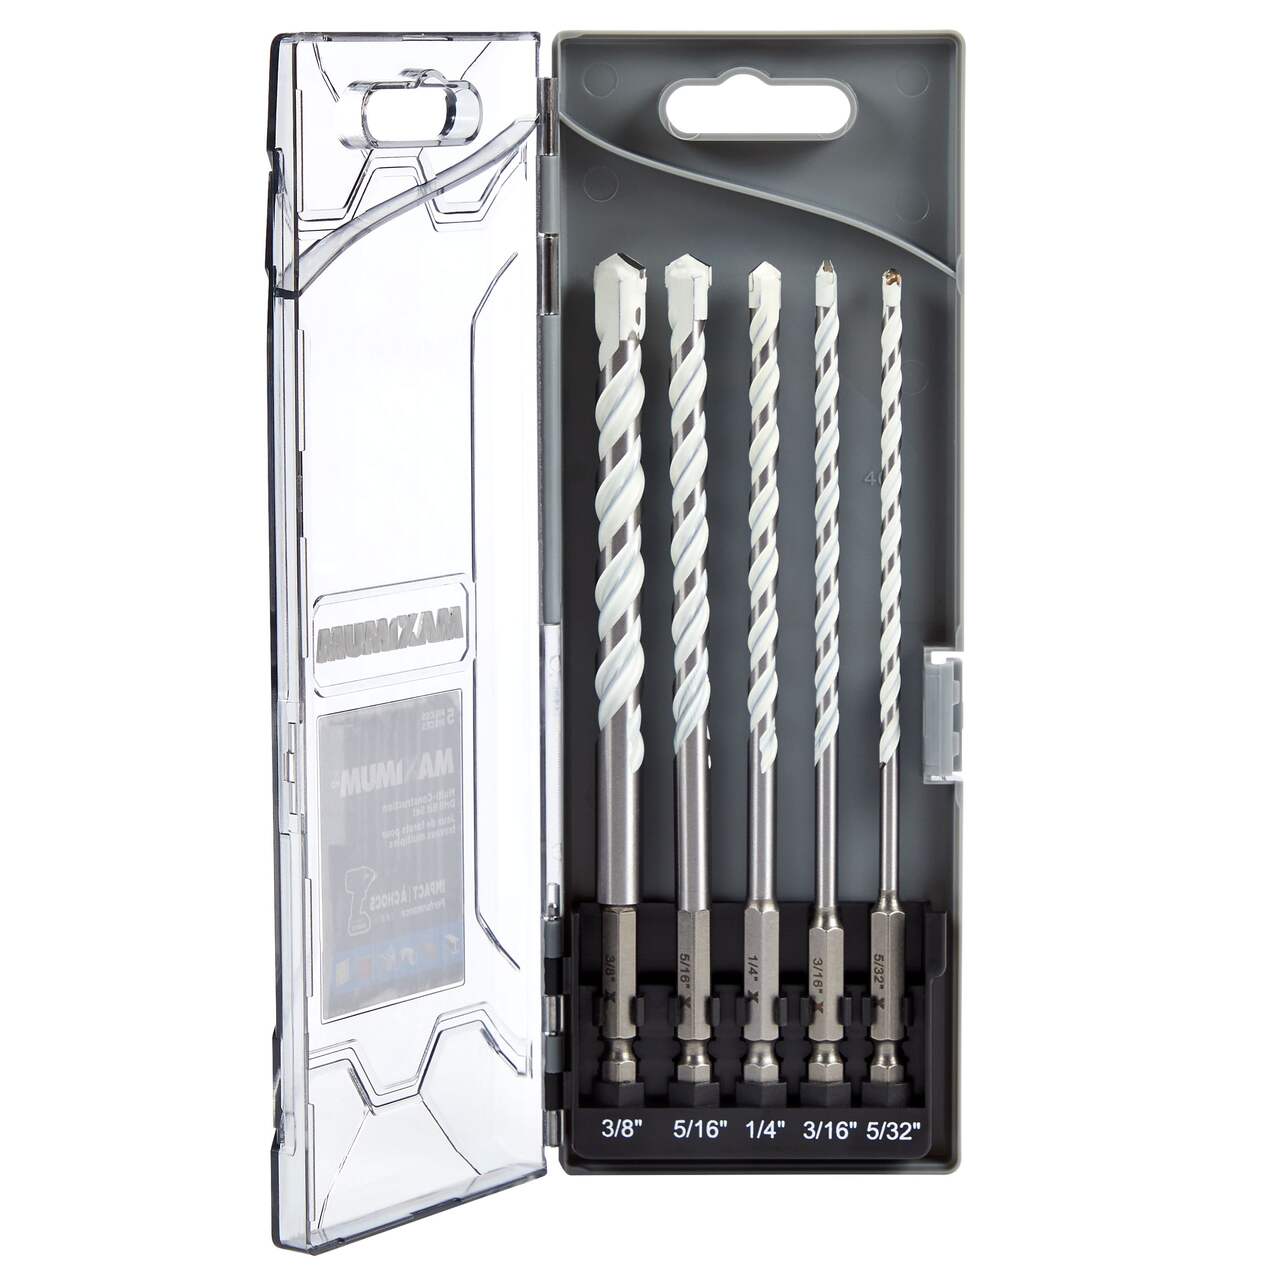 https://media-www.canadiantire.ca/product/fixing/tools/power-tool-accessories/0540289/maximum-5pc-multi-construction-drill-bit-set-ca98479a-7be6-4357-af98-ac1ec973cd62-jpgrendition.jpg?imdensity=1&imwidth=1244&impolicy=mZoom